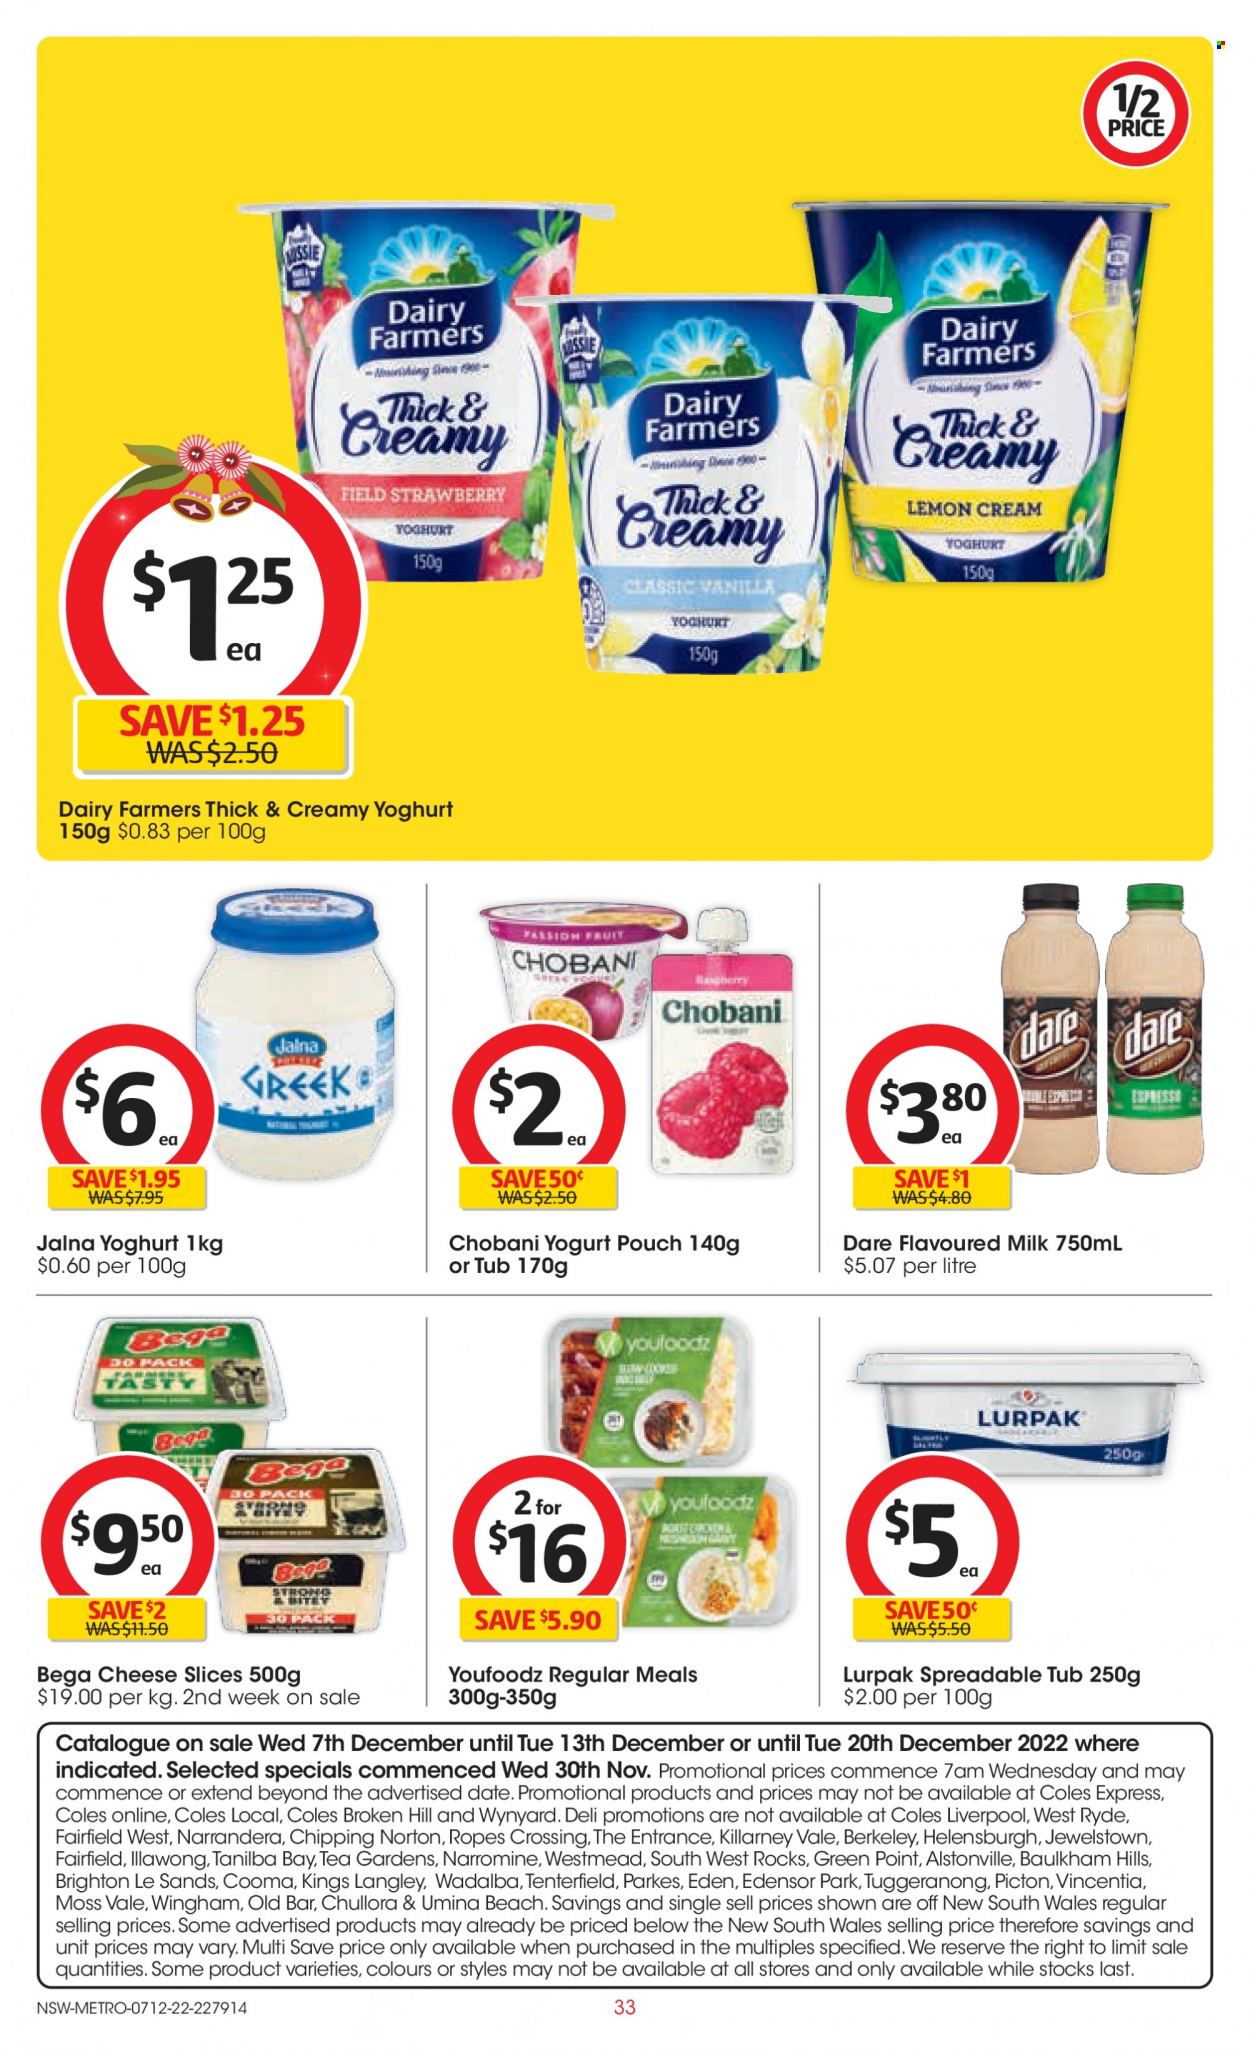 thumbnail - Coles Catalogue - 7 Dec 2022 - 13 Dec 2022 - Sales products - sliced cheese, cheese, yoghurt, Chobani, milk, flavoured milk, tea, Hill's. Page 33.